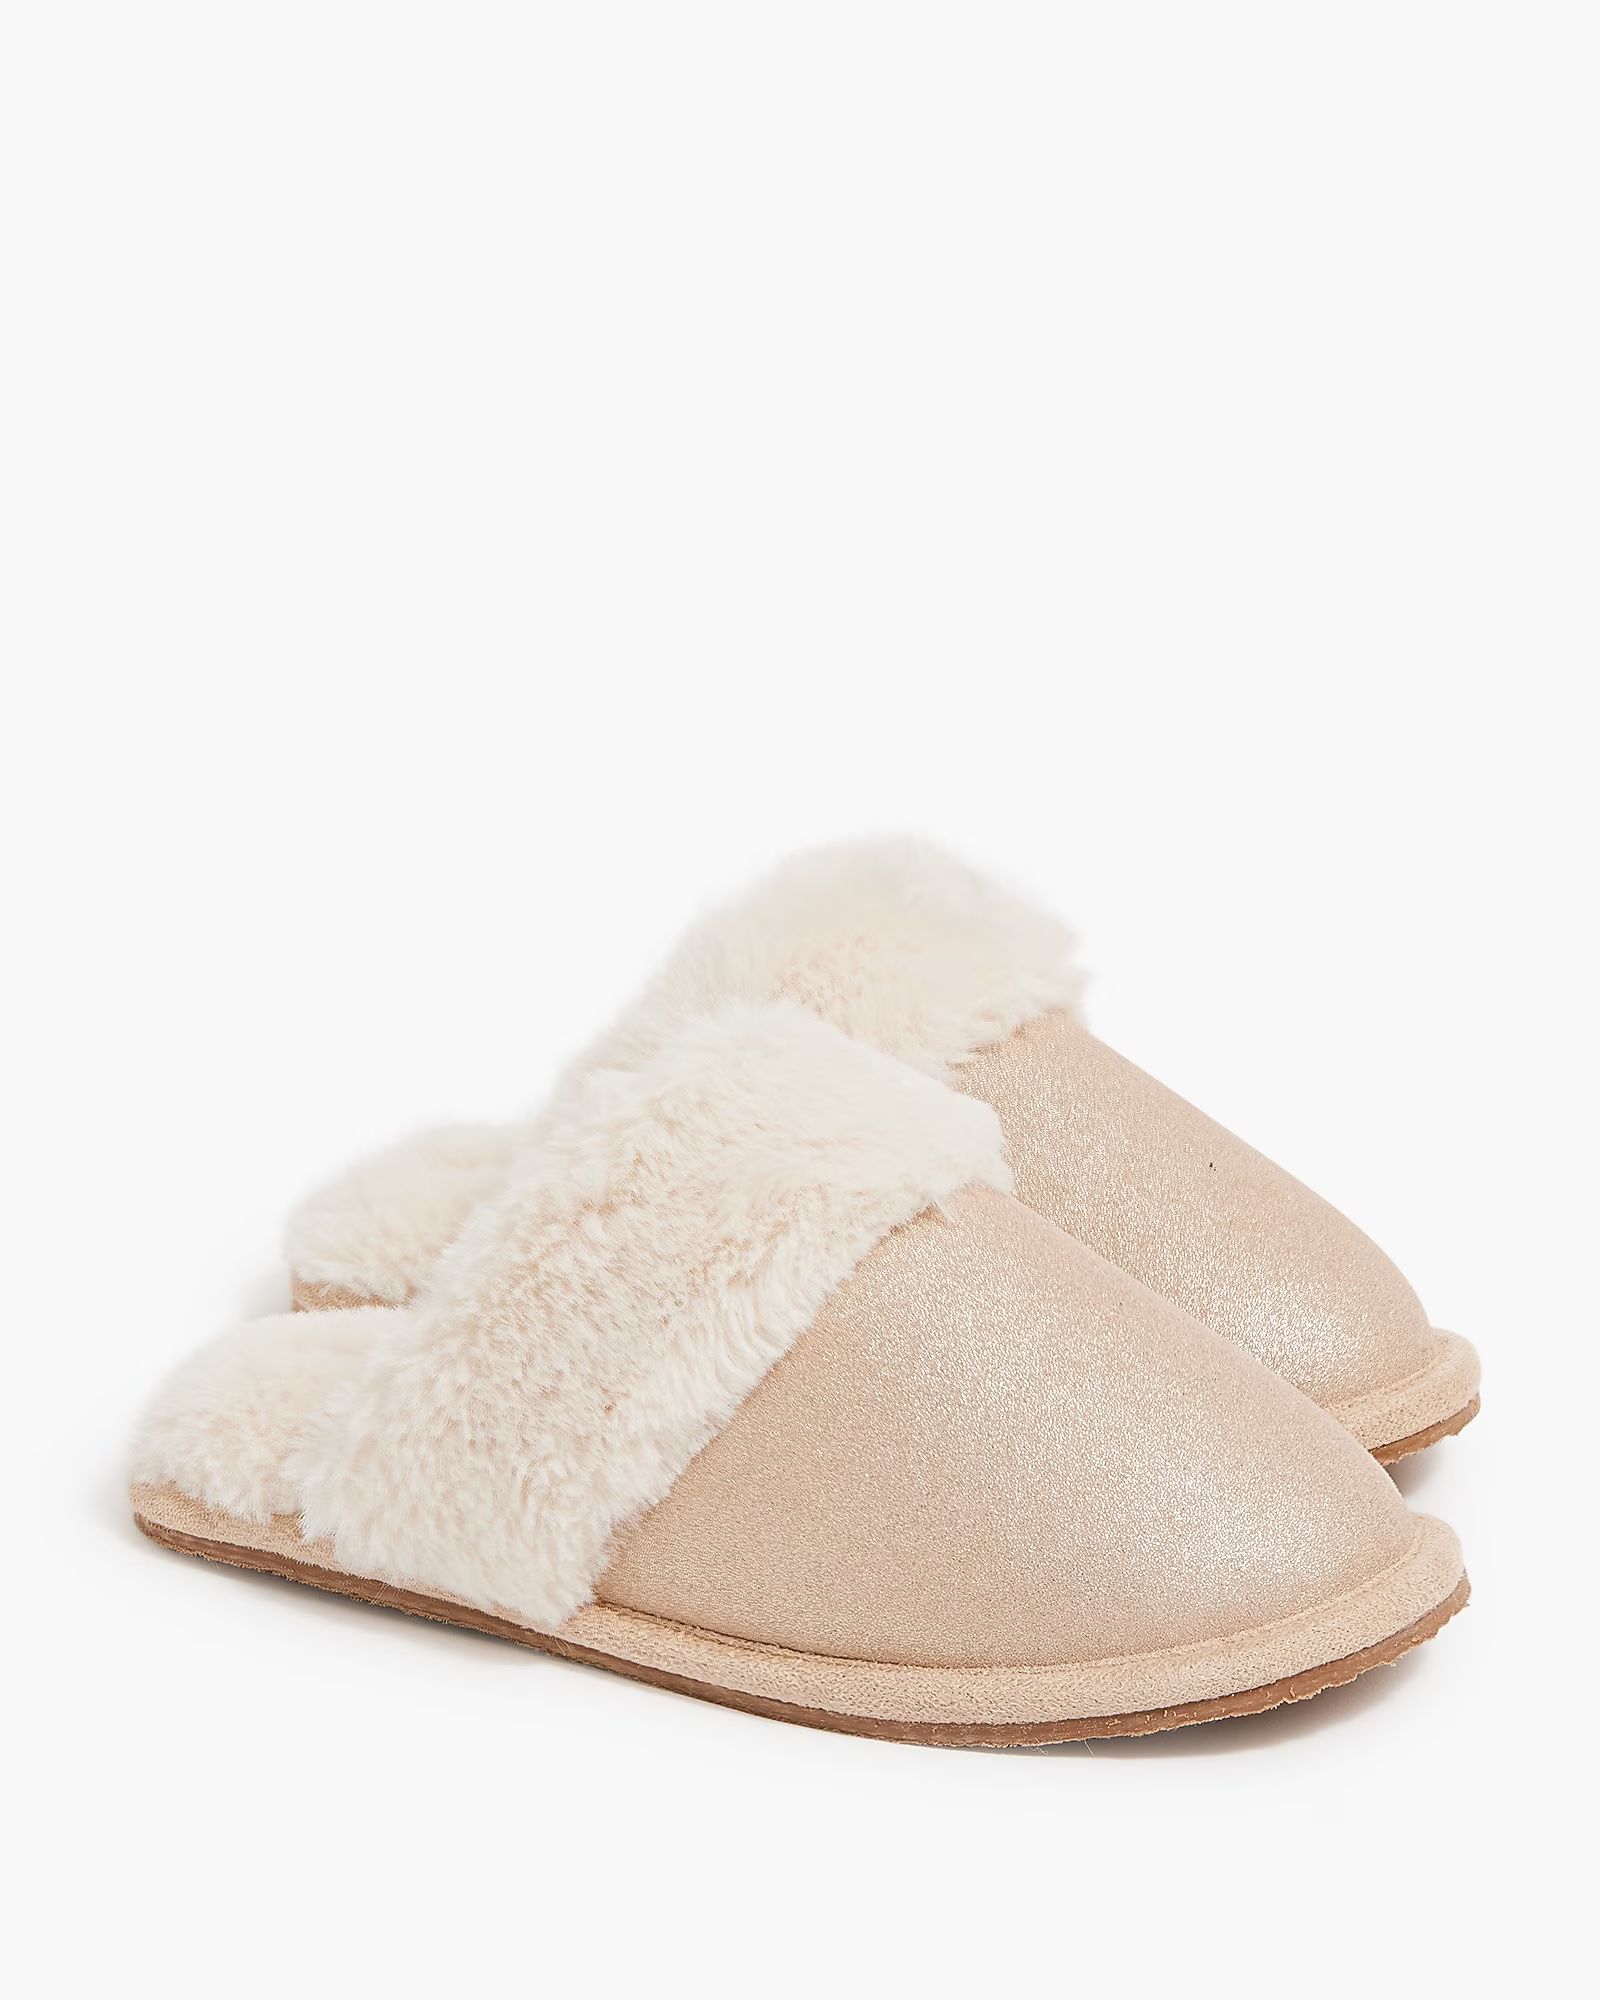 Girls' faux fur-lined slippers | J.Crew Factory